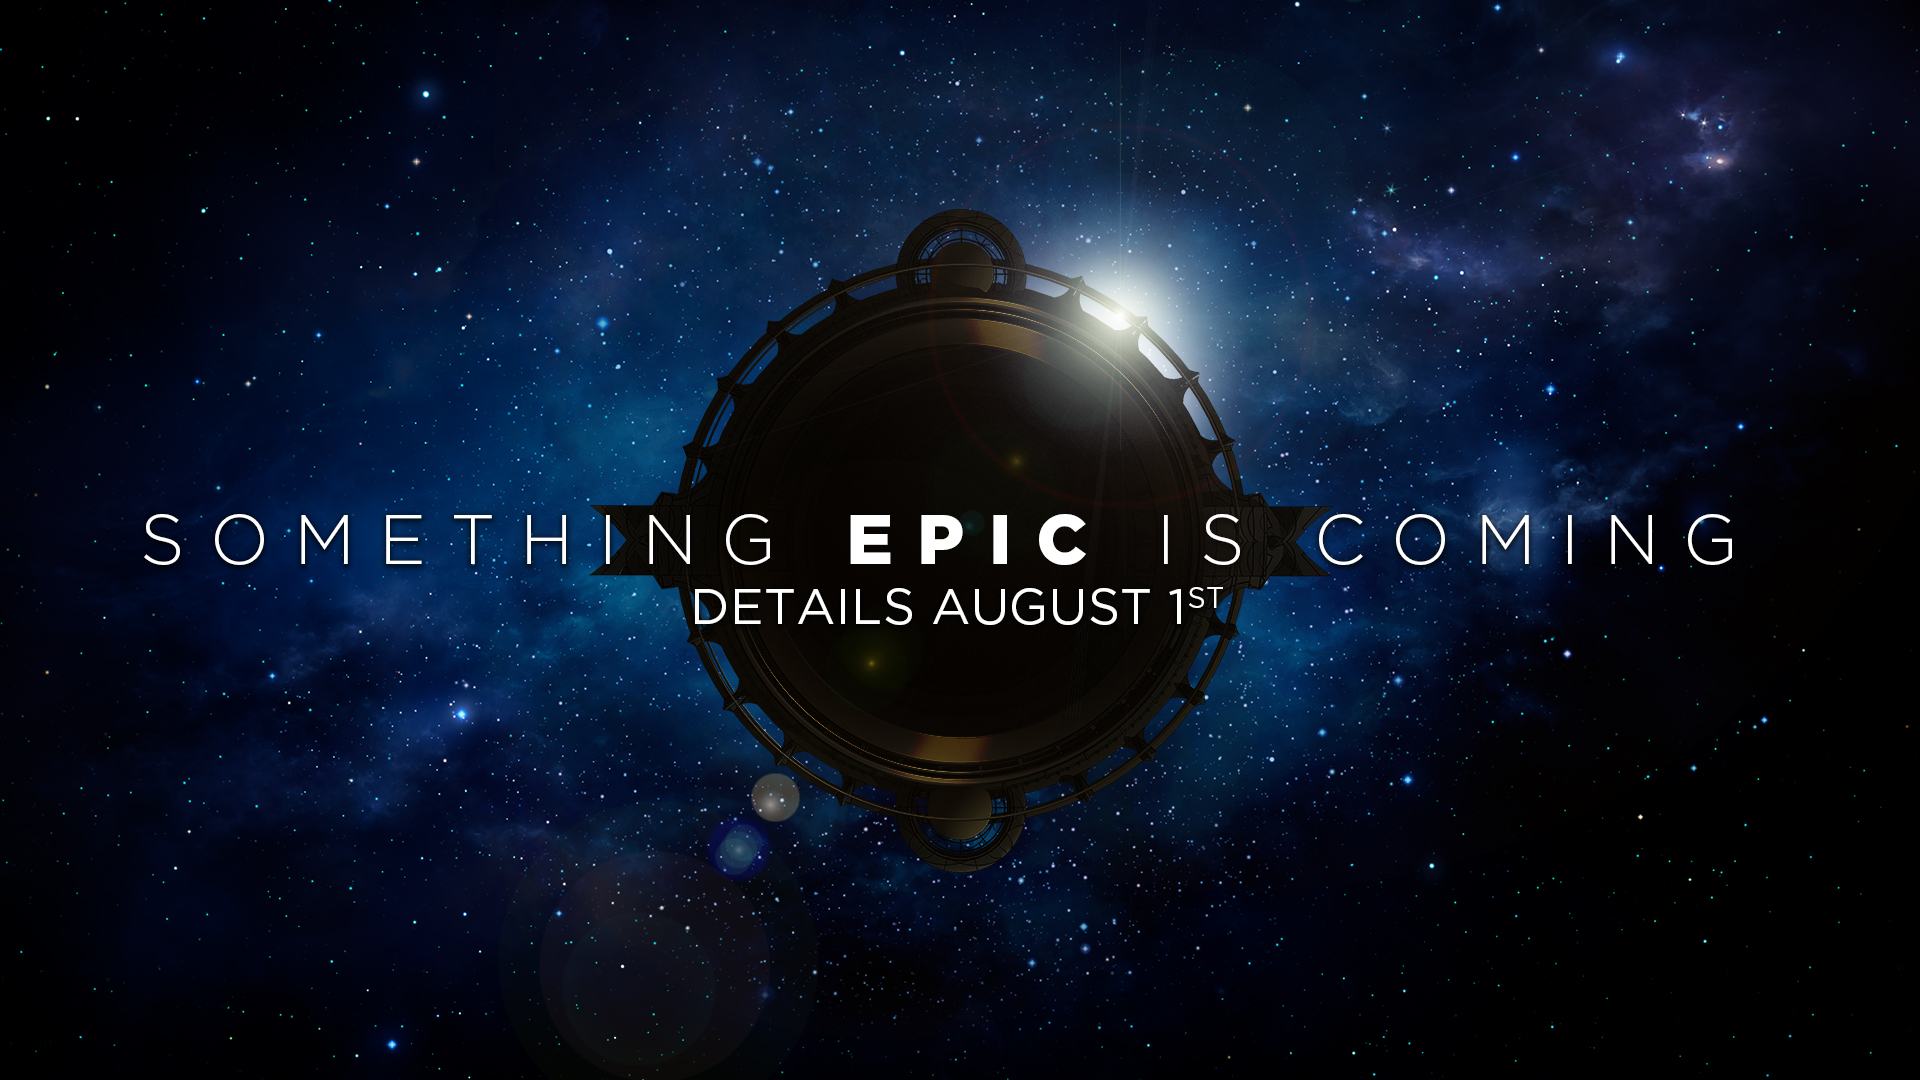 Universal Orlando Resort will make an EPIC announcement on August 1st